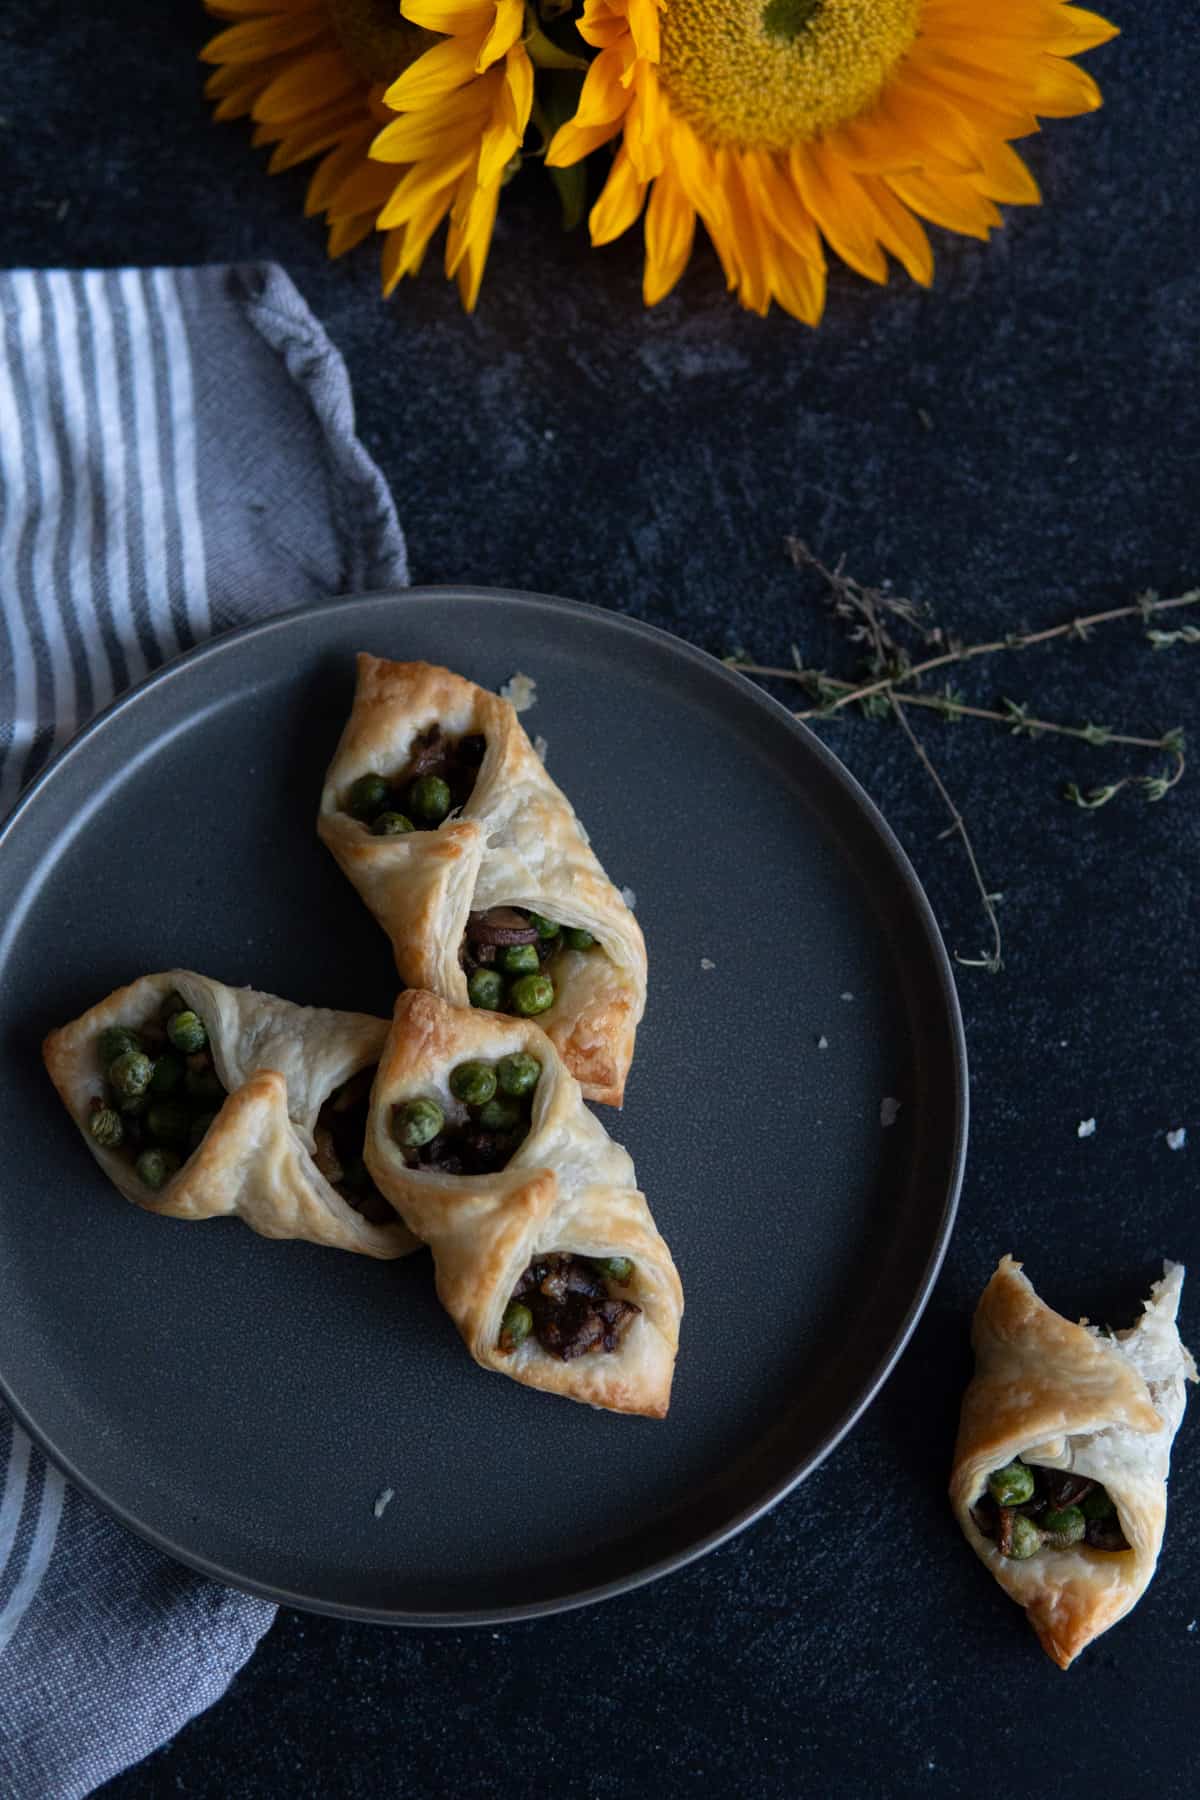 Baked puff pastries on mushroom on a plate.